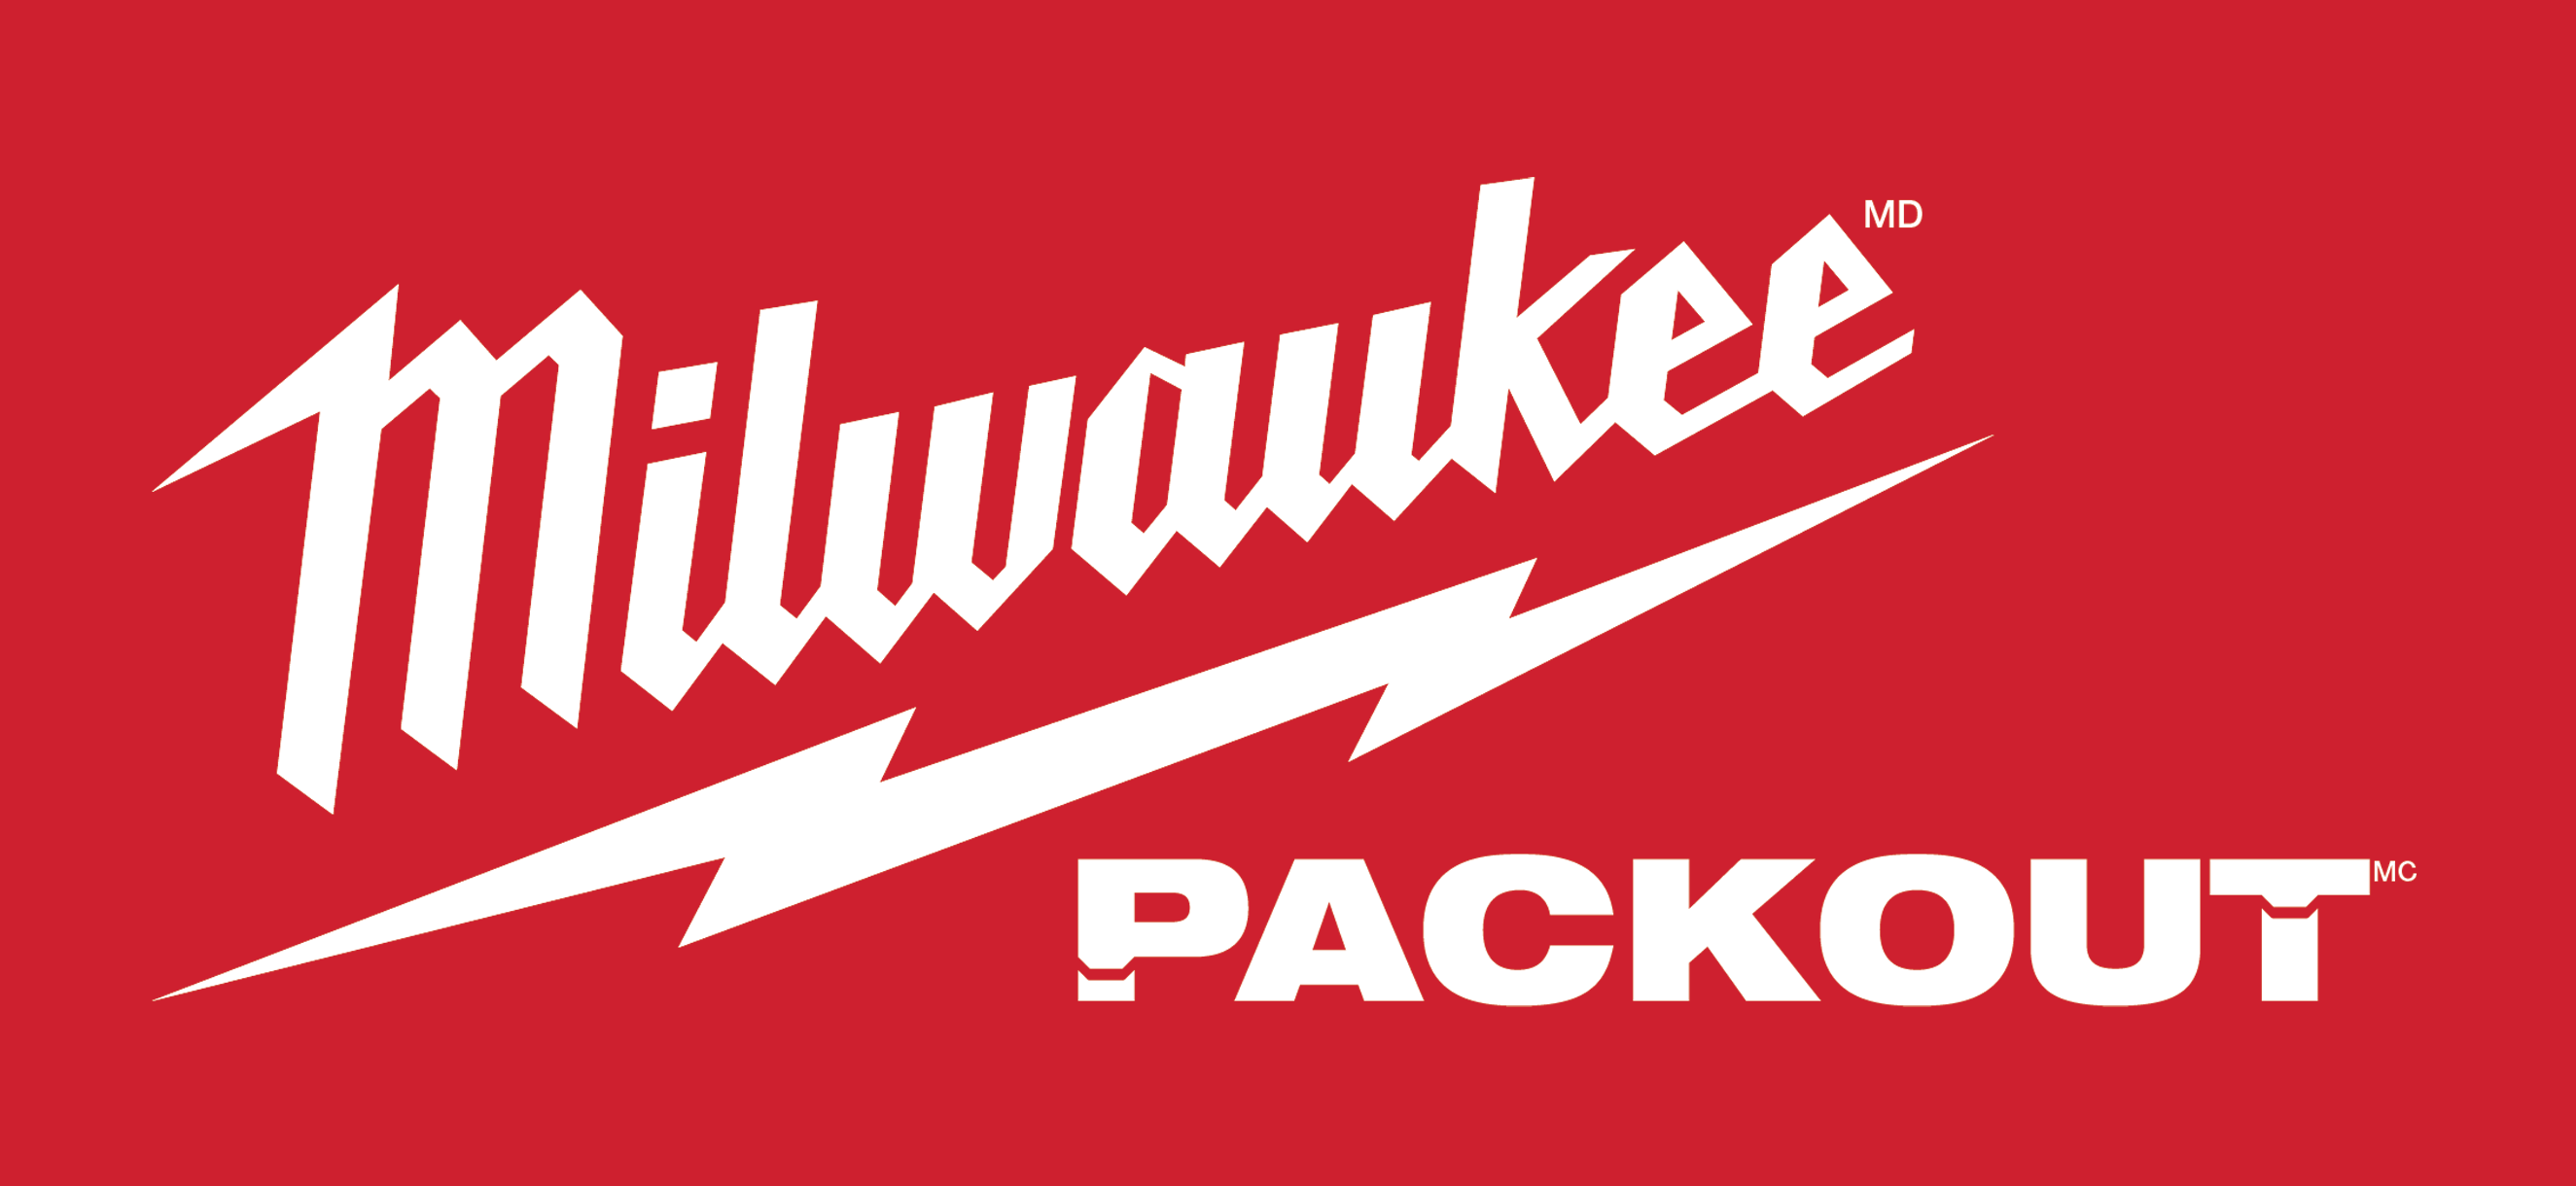 milwaukee-packout-logo_white-on-red-fr